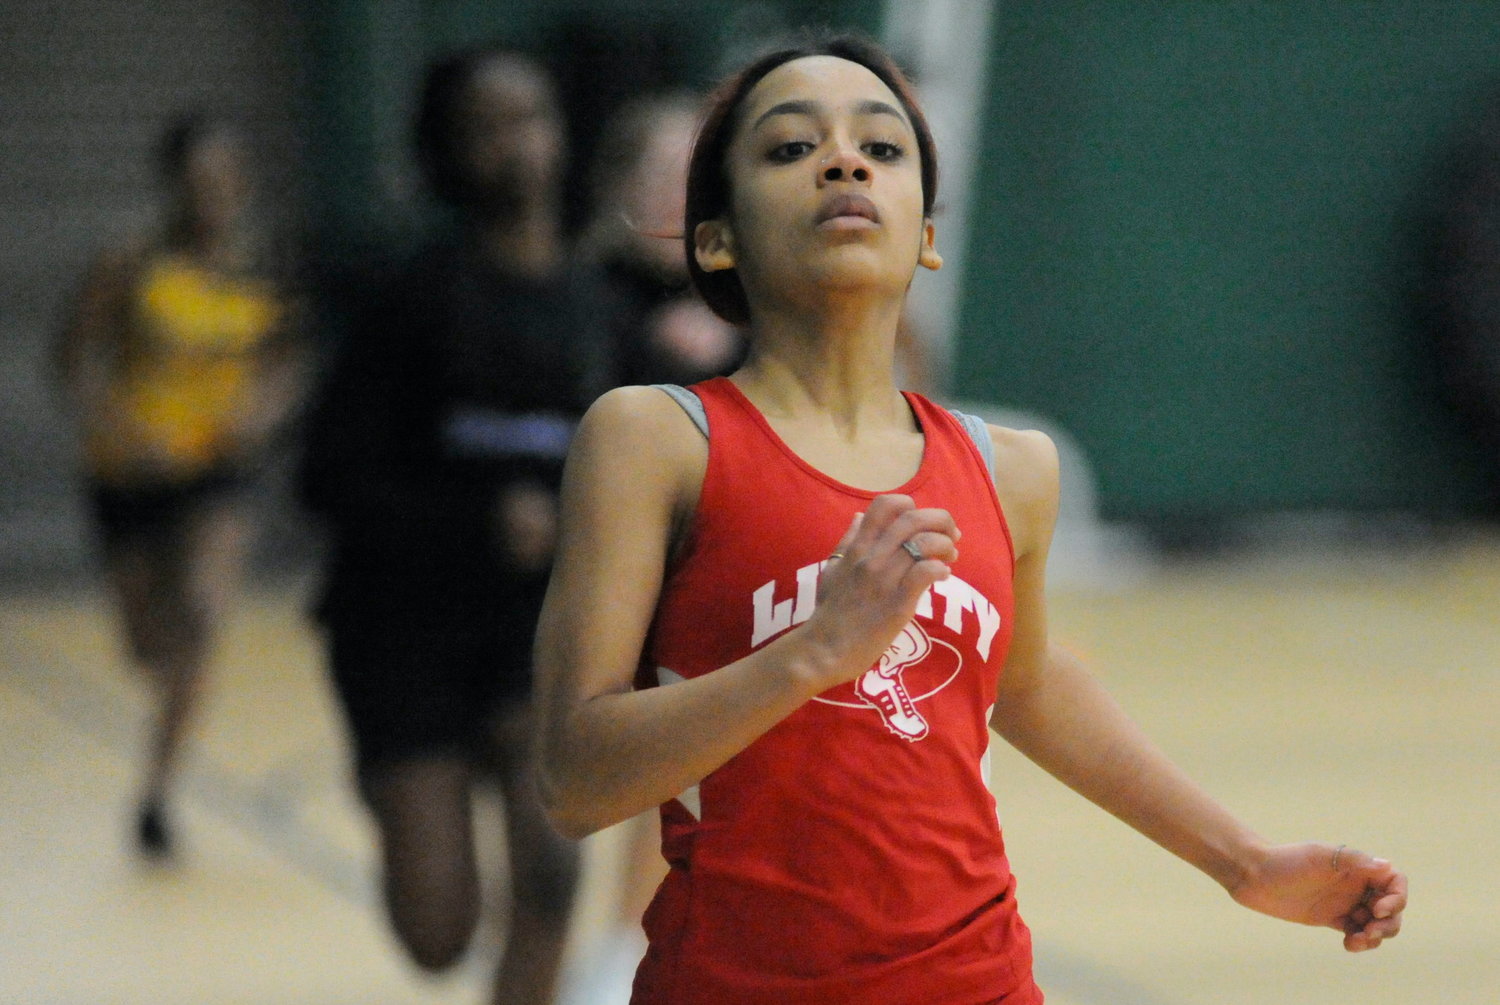 Liberty’s Tatiana Reyes, a senior, competes in the 55-meter and 300-meter events.